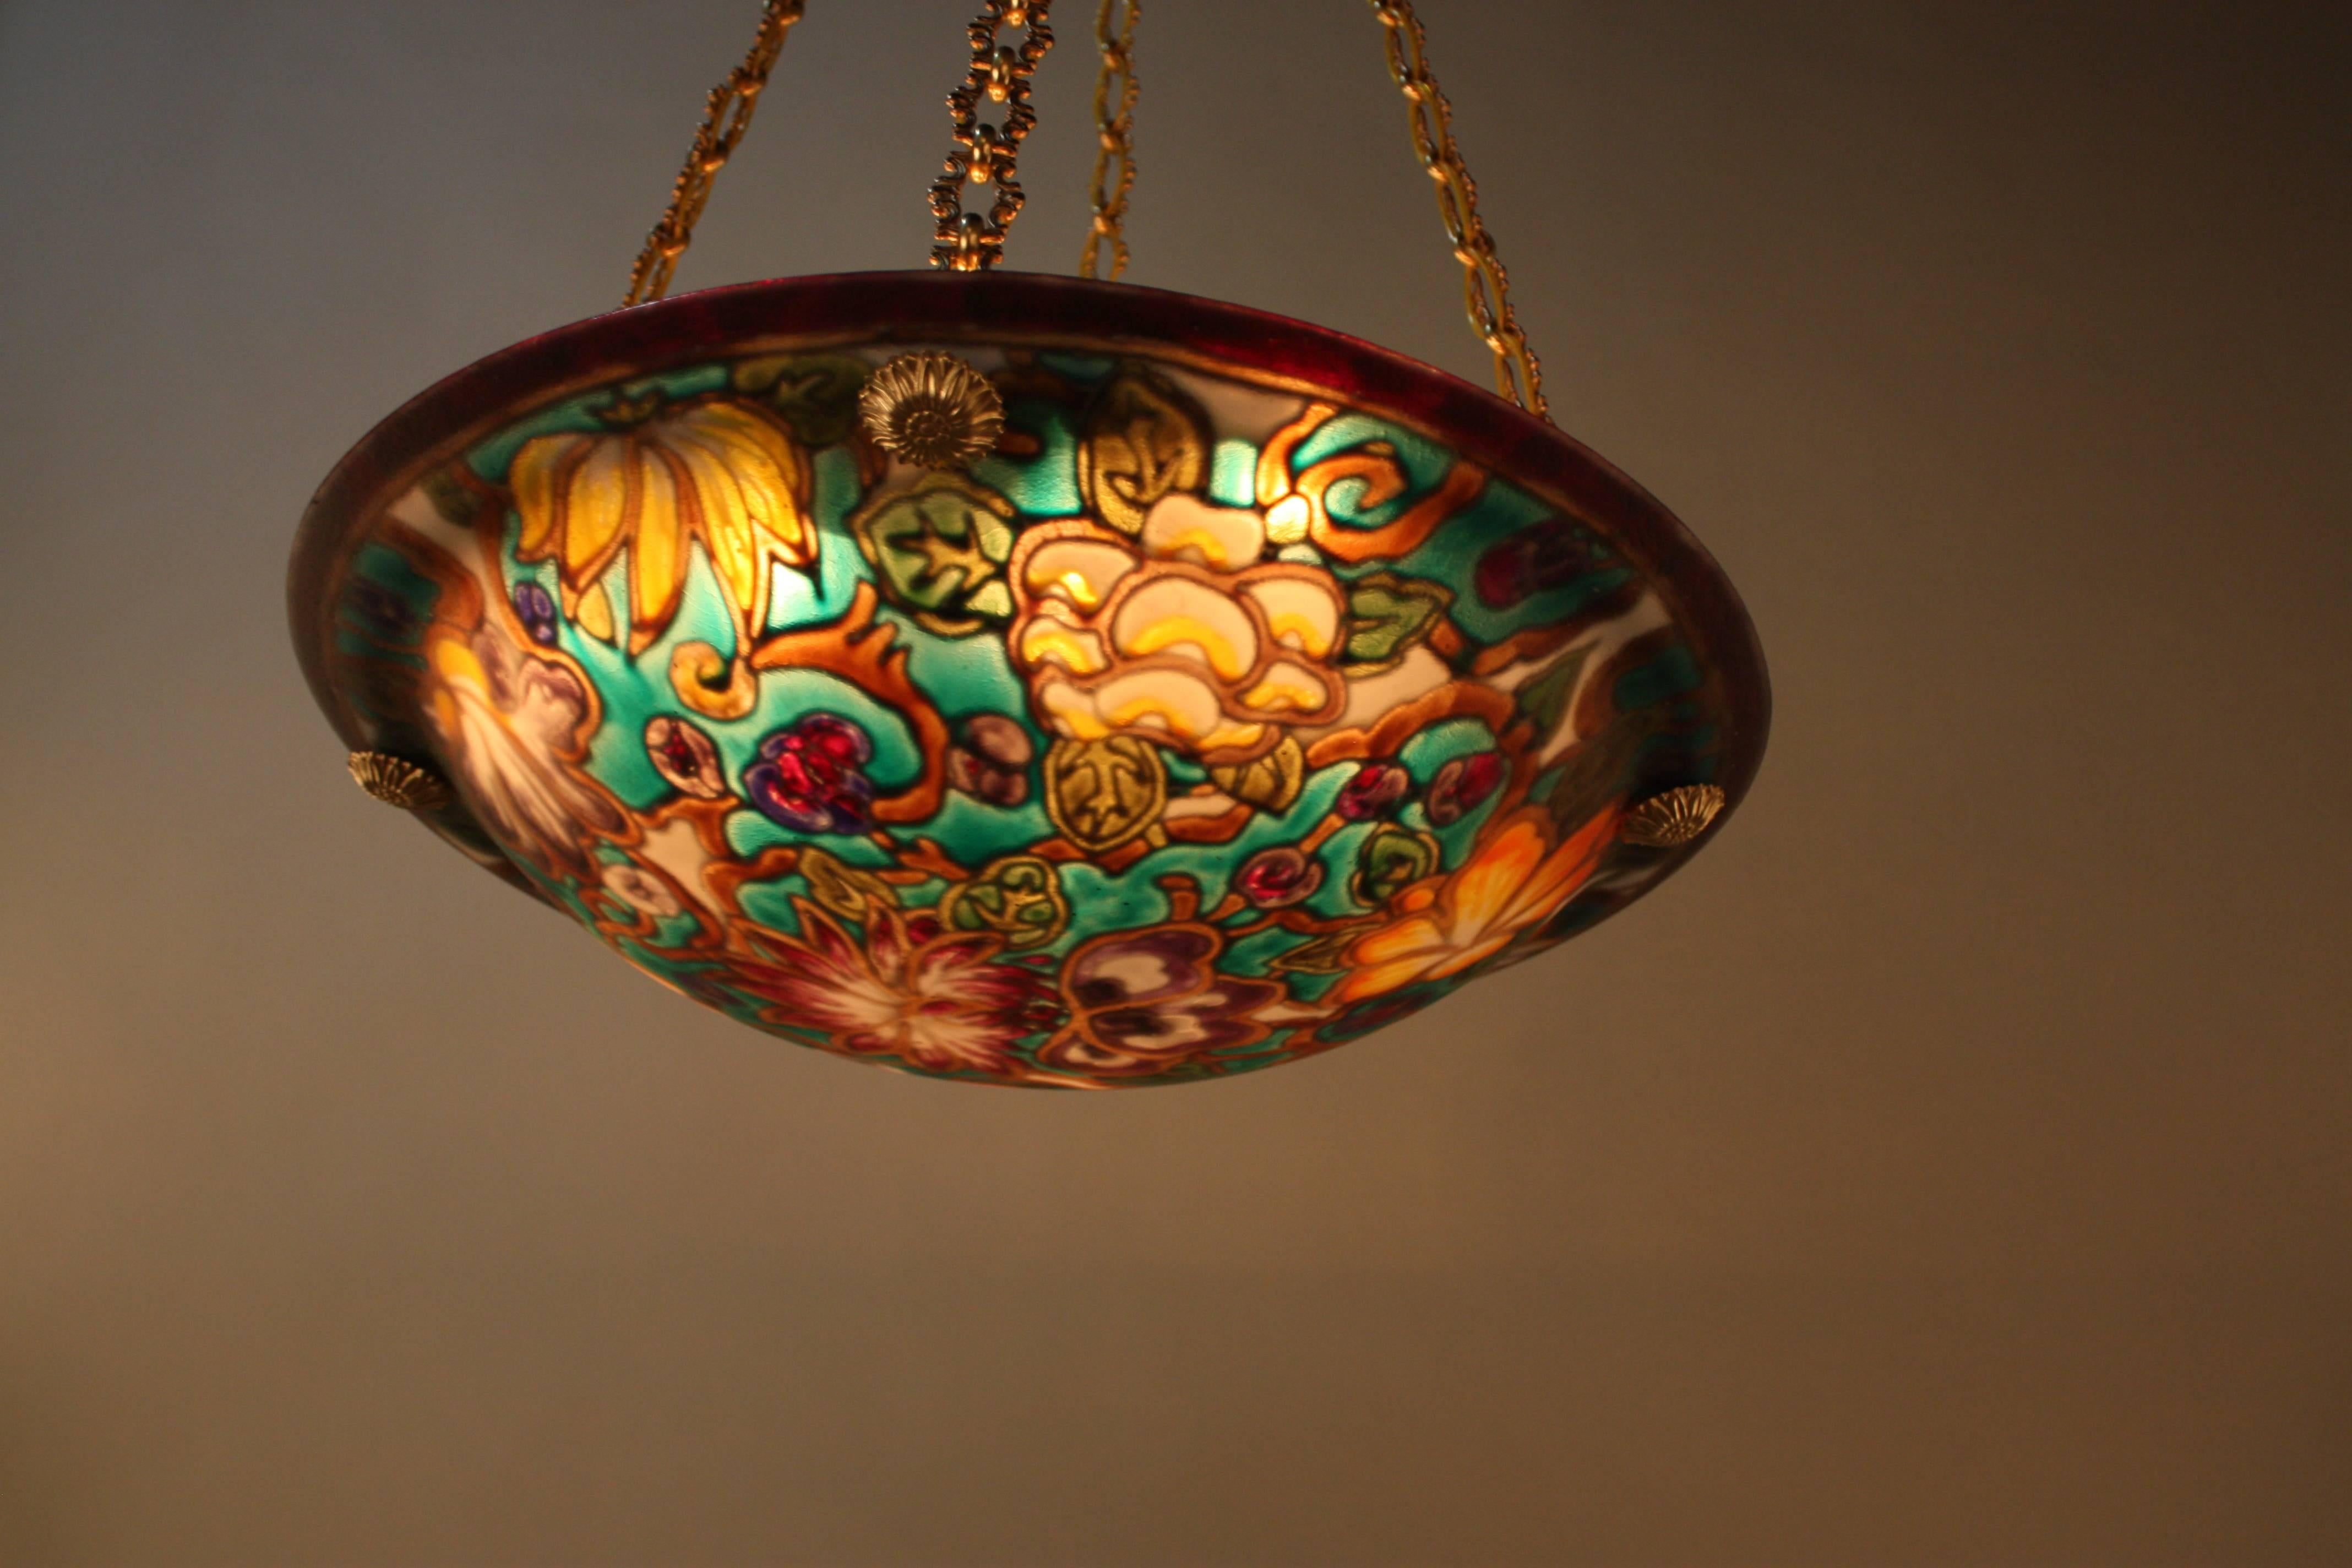 Fantastic reverse painted glass chandelier. Masterfully painted in the same style of late 19th or early 20th century that the thickness of glazed paint reflects the shape and color of the flowers through glass.
Bronze chain and canopy.
Measures: